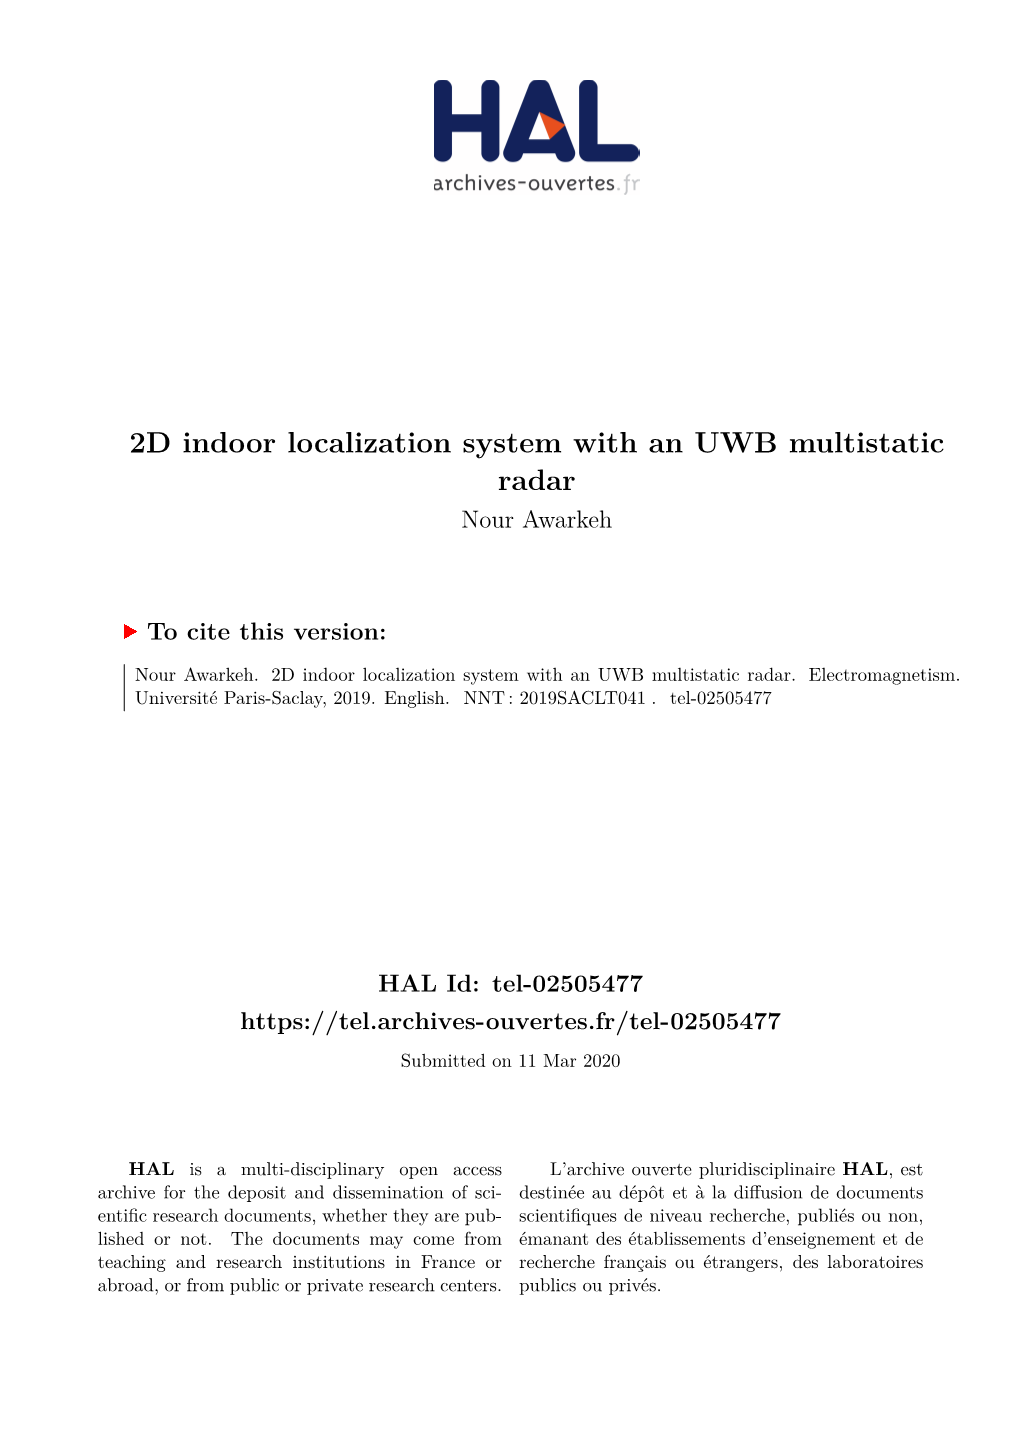 2D Indoor Localization System with an UWB Multistatic Radar Nour Awarkeh